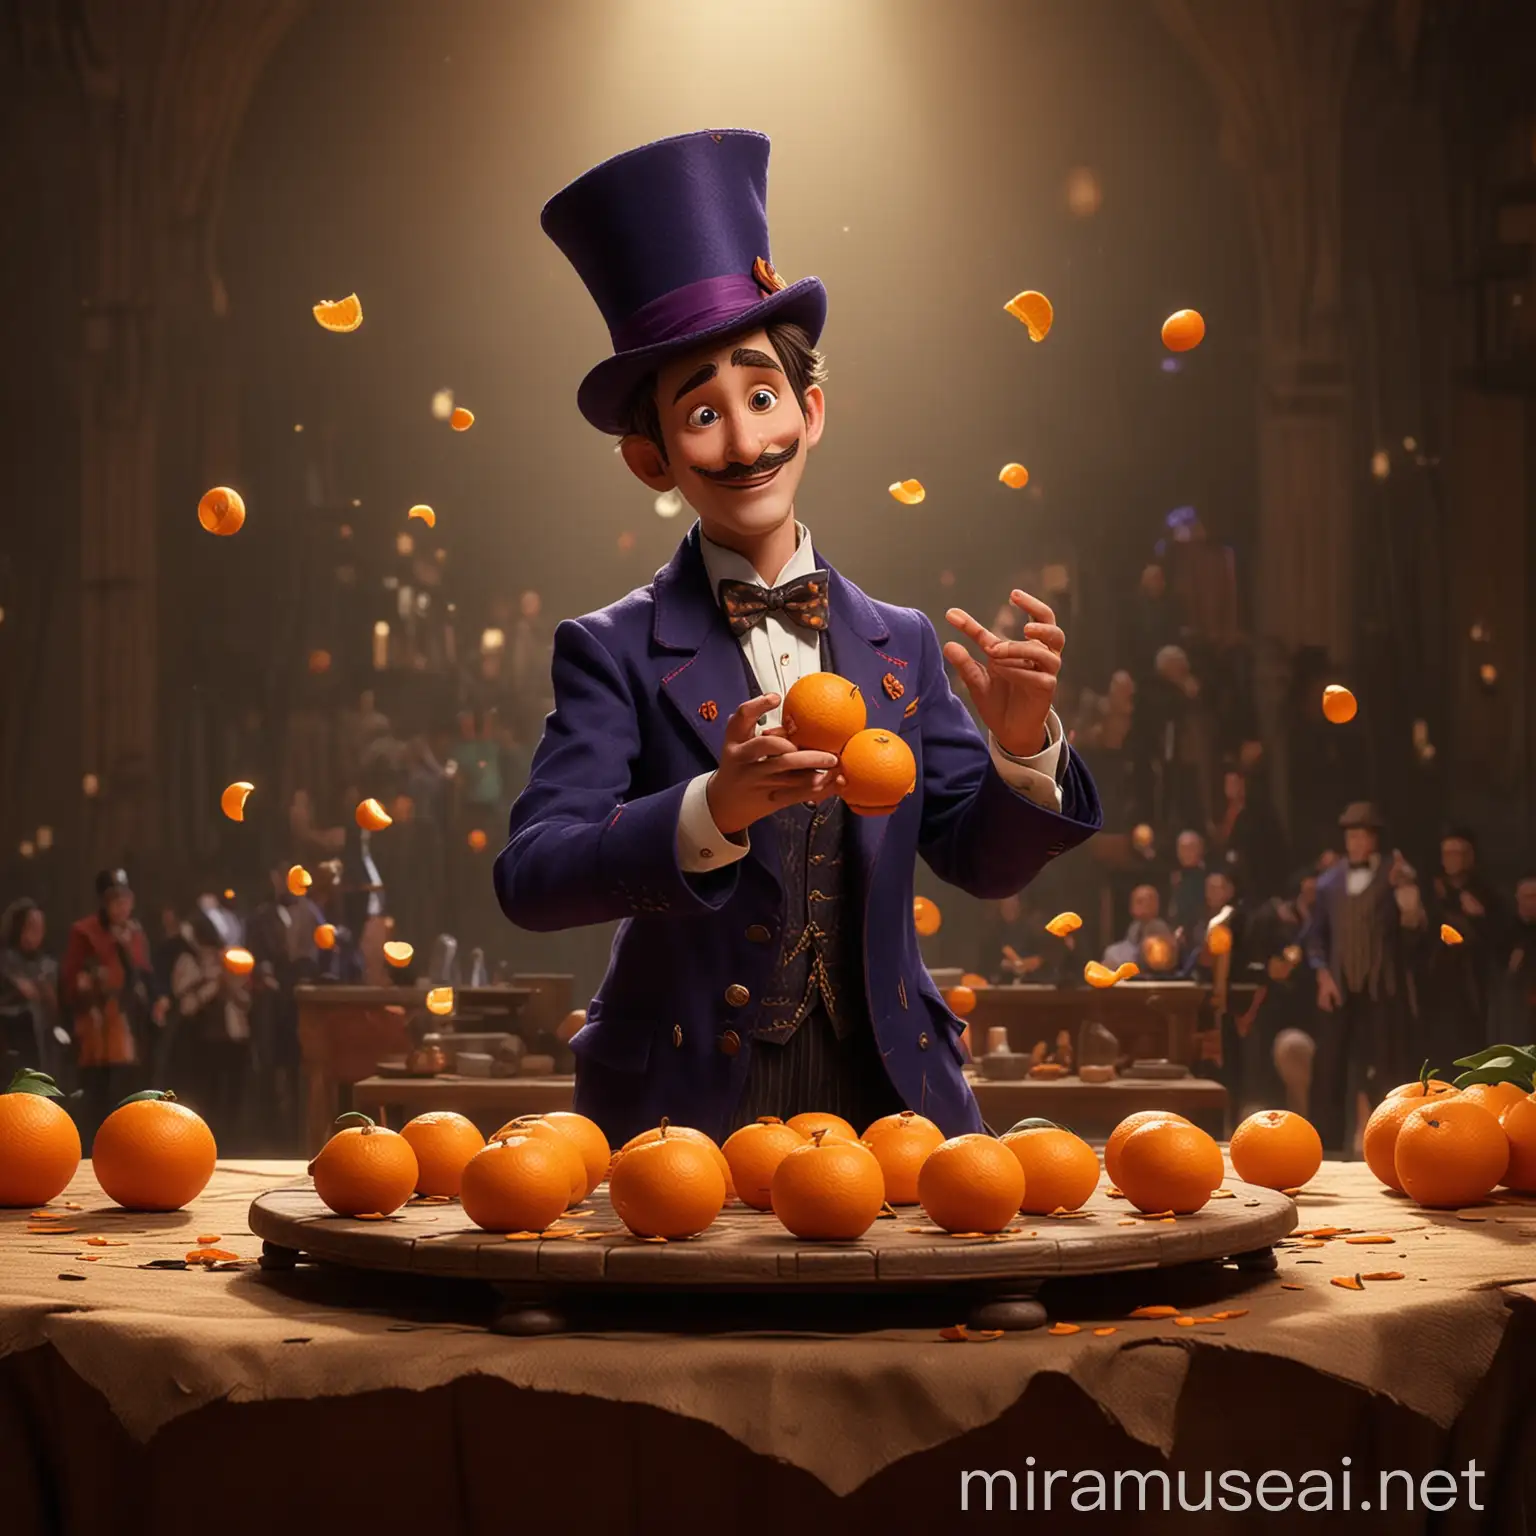 Magician Performing on Stage with Oranges Disney Pixar Style